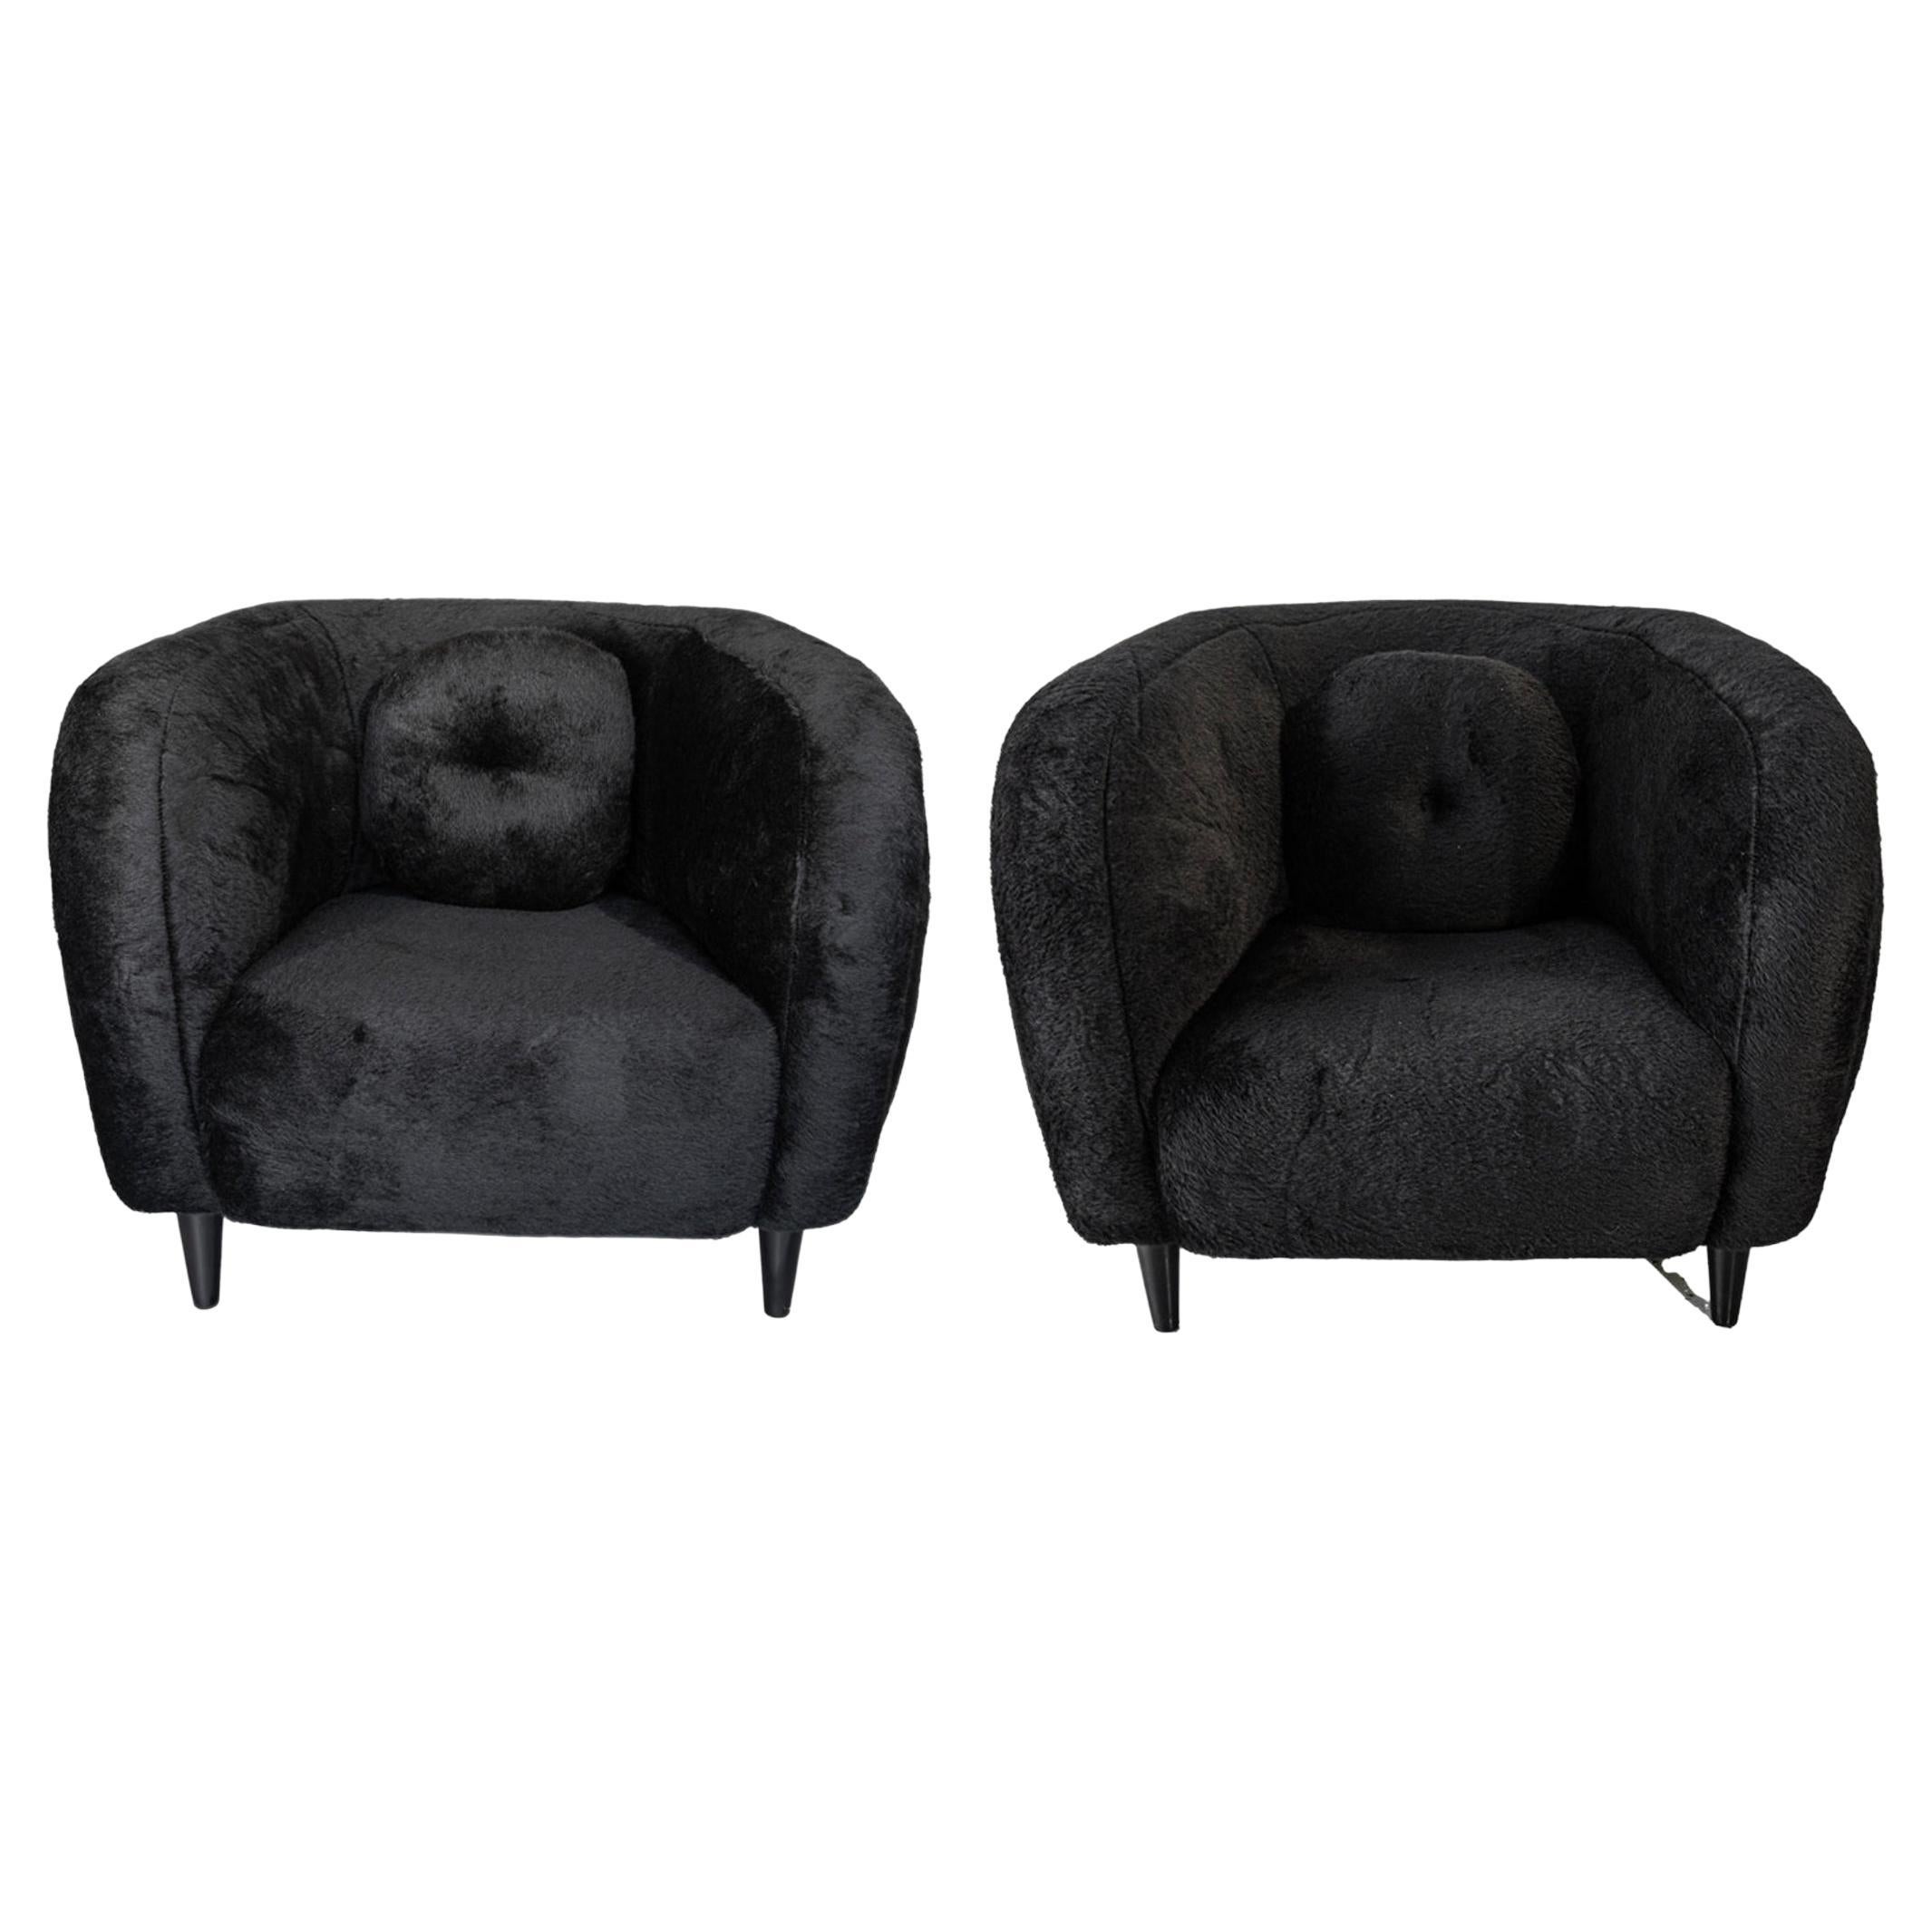 Black Alpaca, Curved, Organic Modern Chairs by Pierre Augustin Rose - set of 2